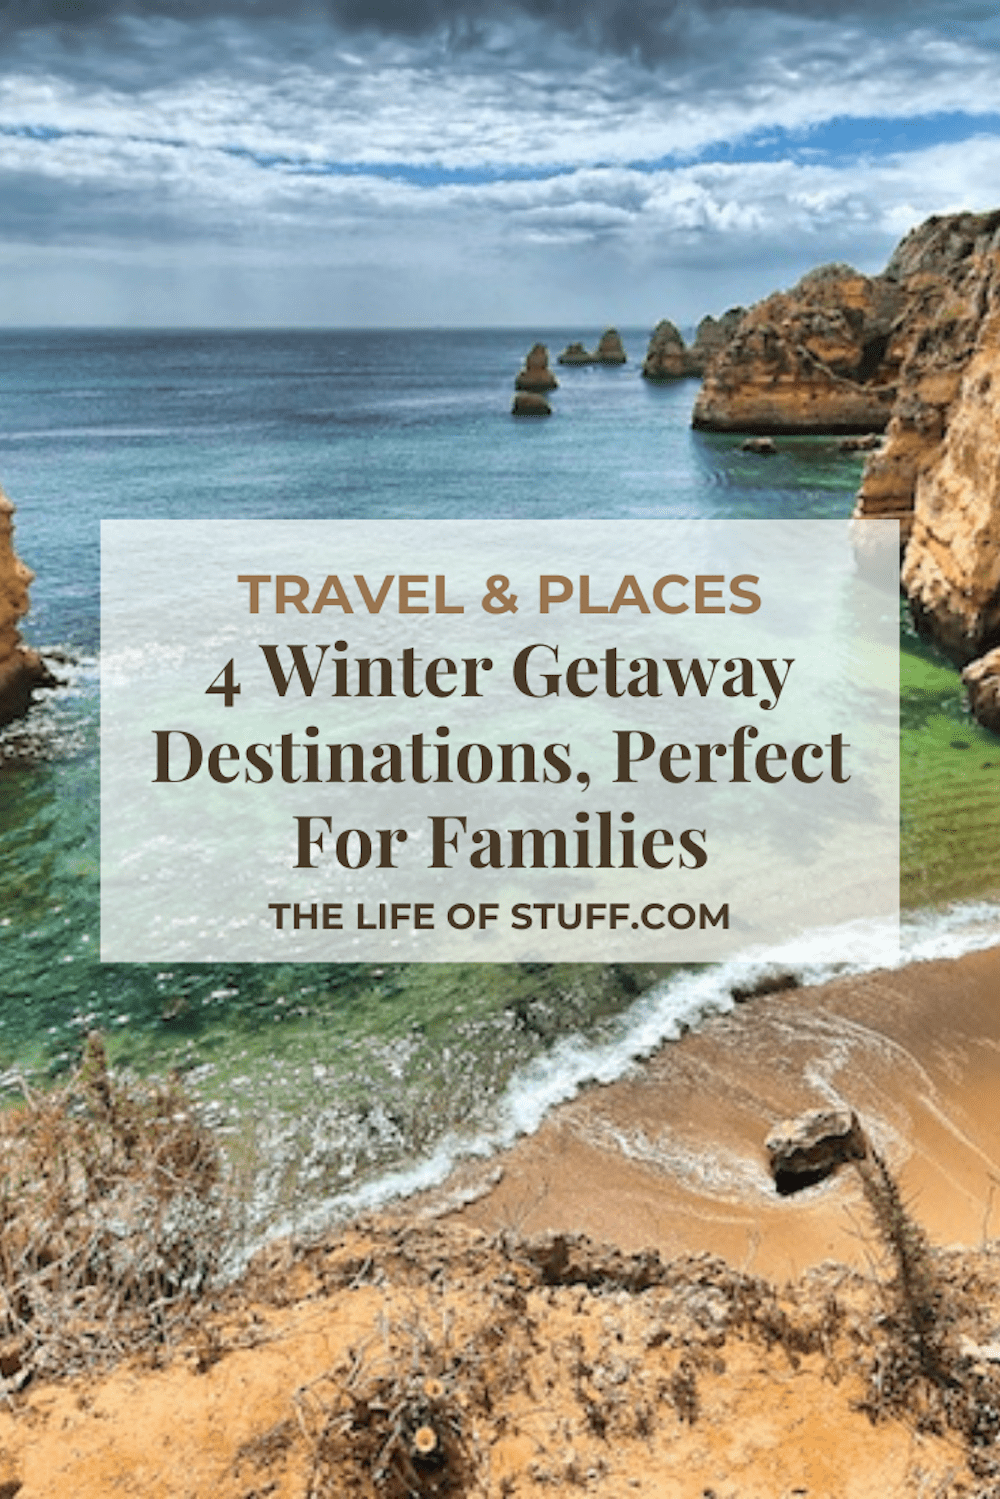 4 Winter Getaway Destinations, Perfect For Families - The Life of Stuff